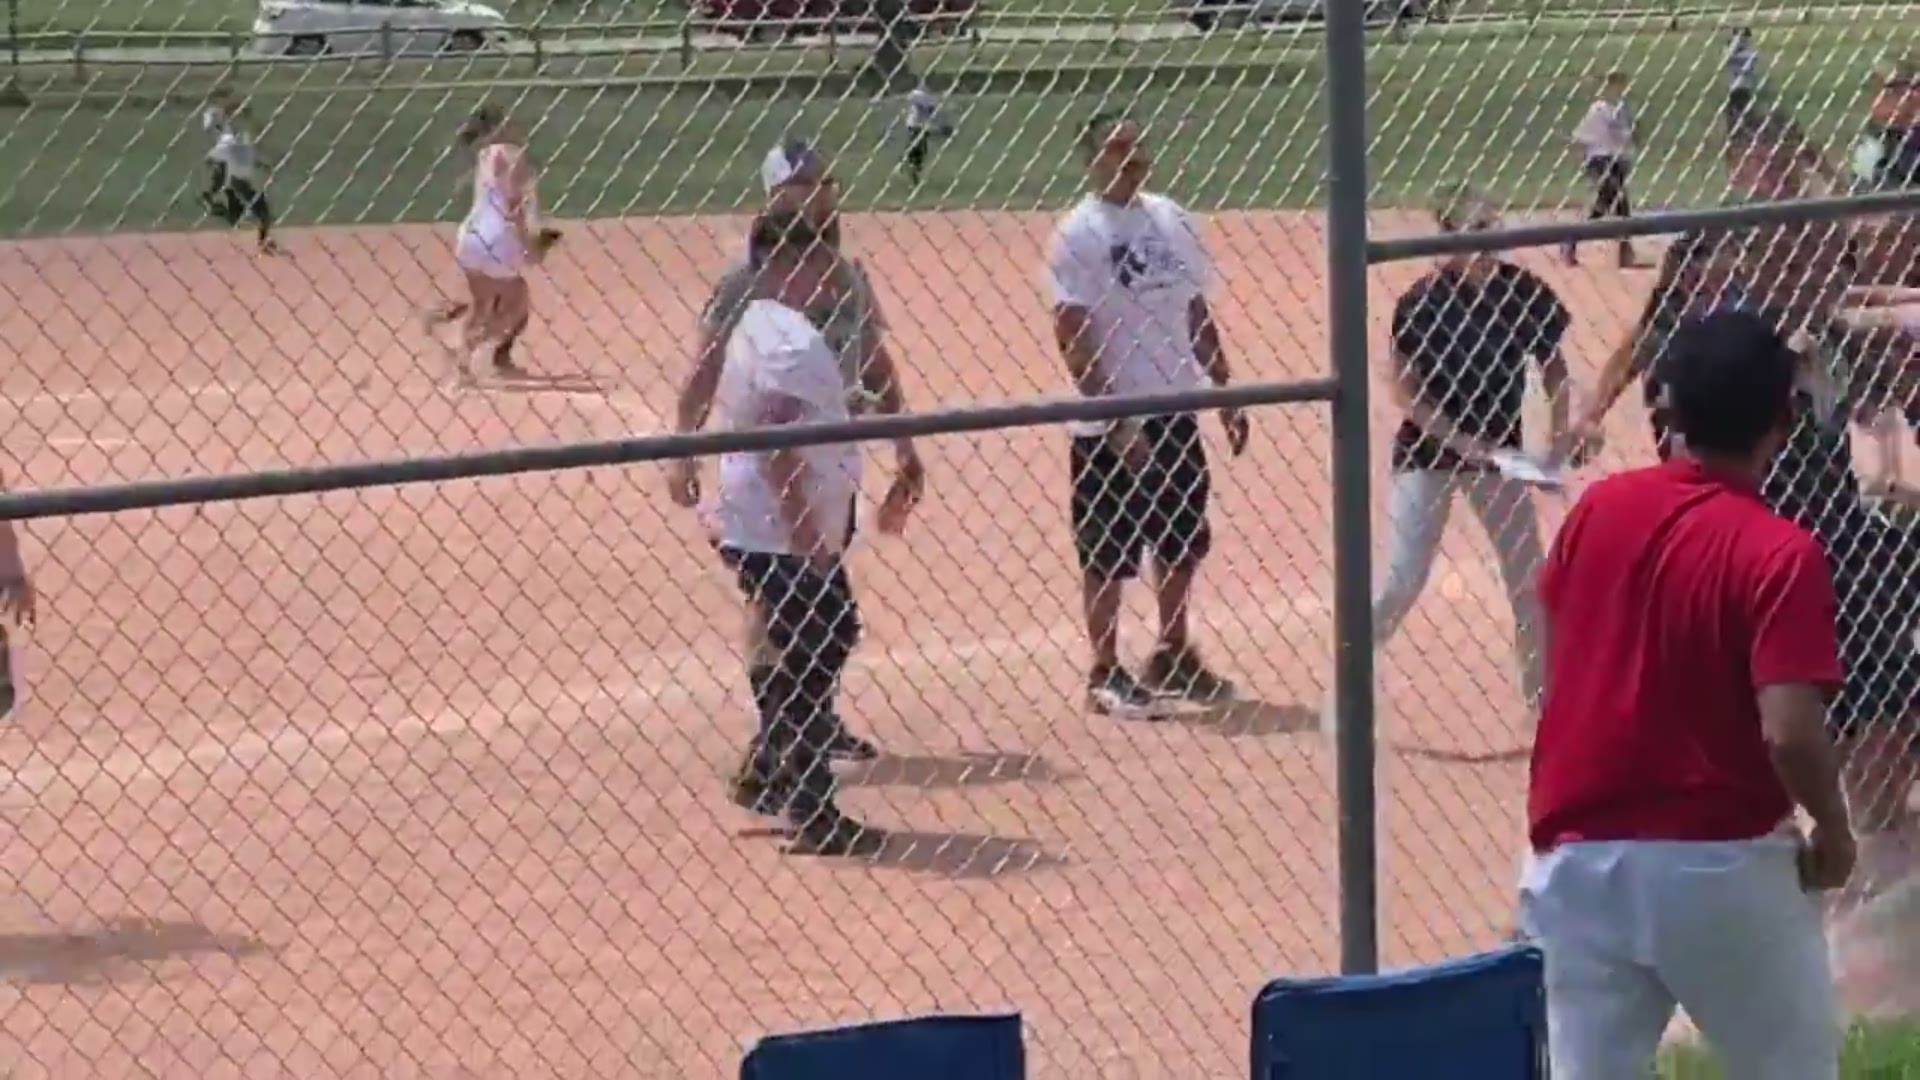 The Lakewood Police Department in Colorado released video of a fight that broke out at a baseball game involving 7 year olds at Westgate Elementary School.